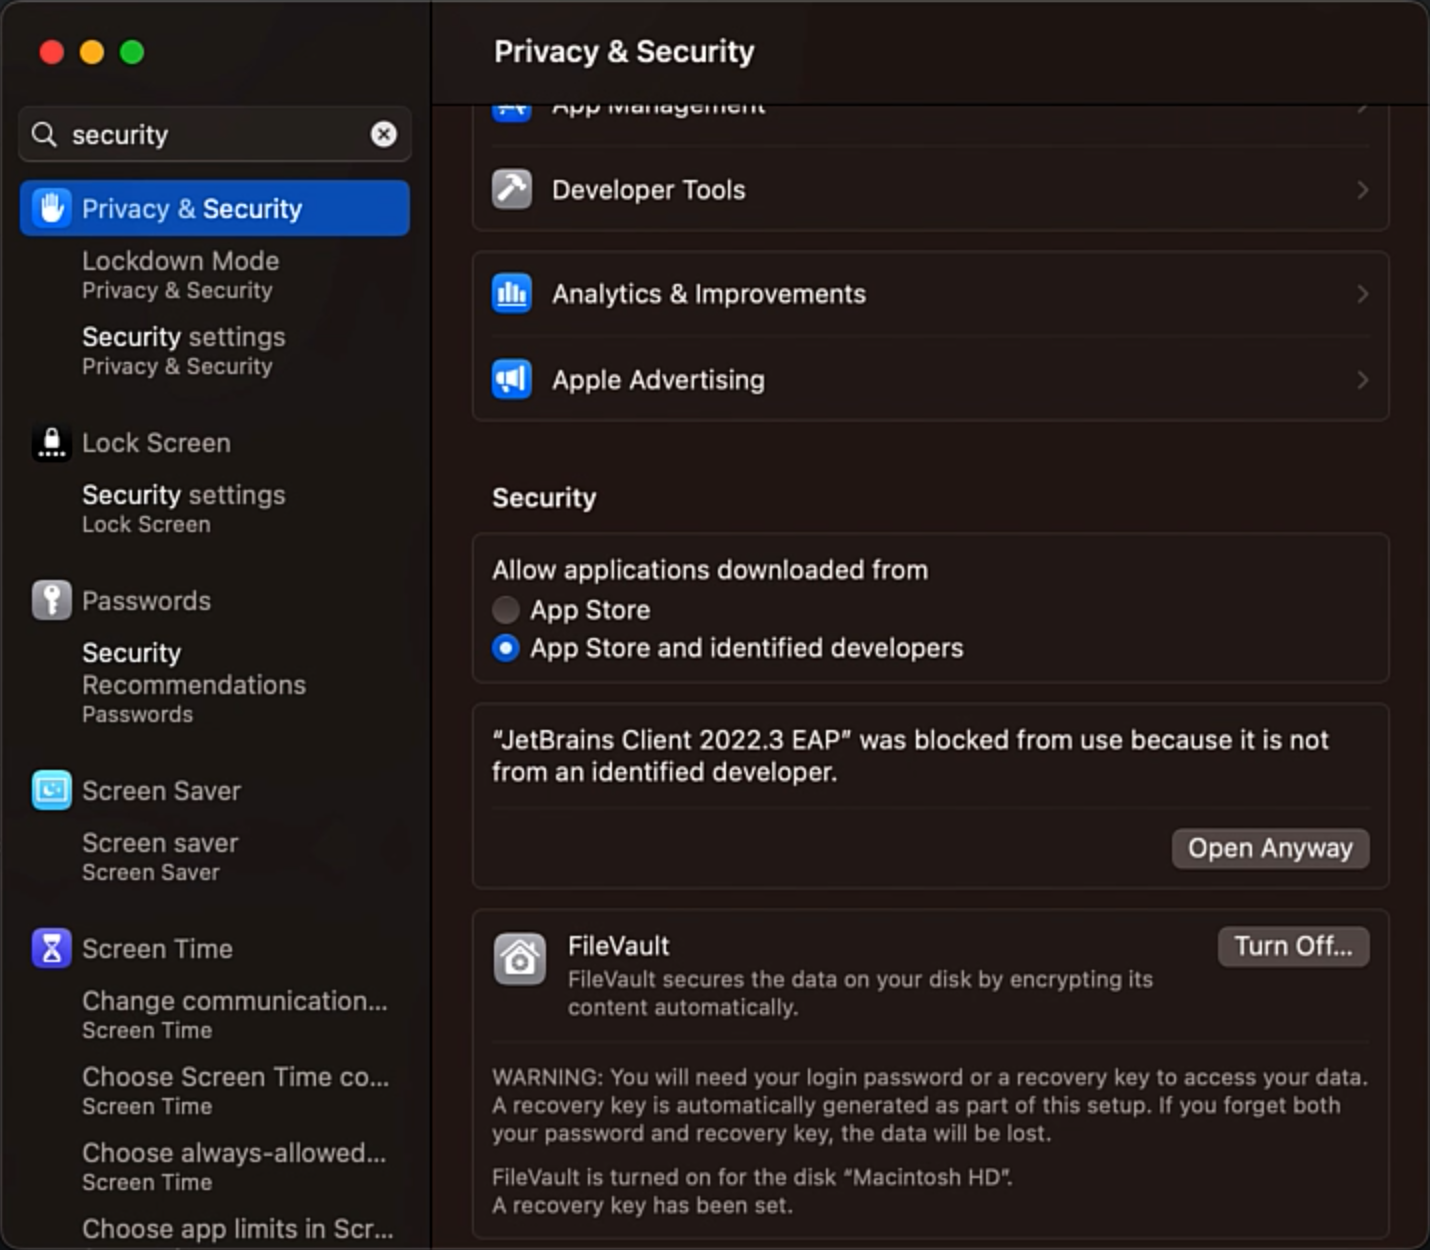 Screenshot of MacOS "Privacy & Security" dialog, with a security message above the JetBrains Client and the "Open Anyway" button.